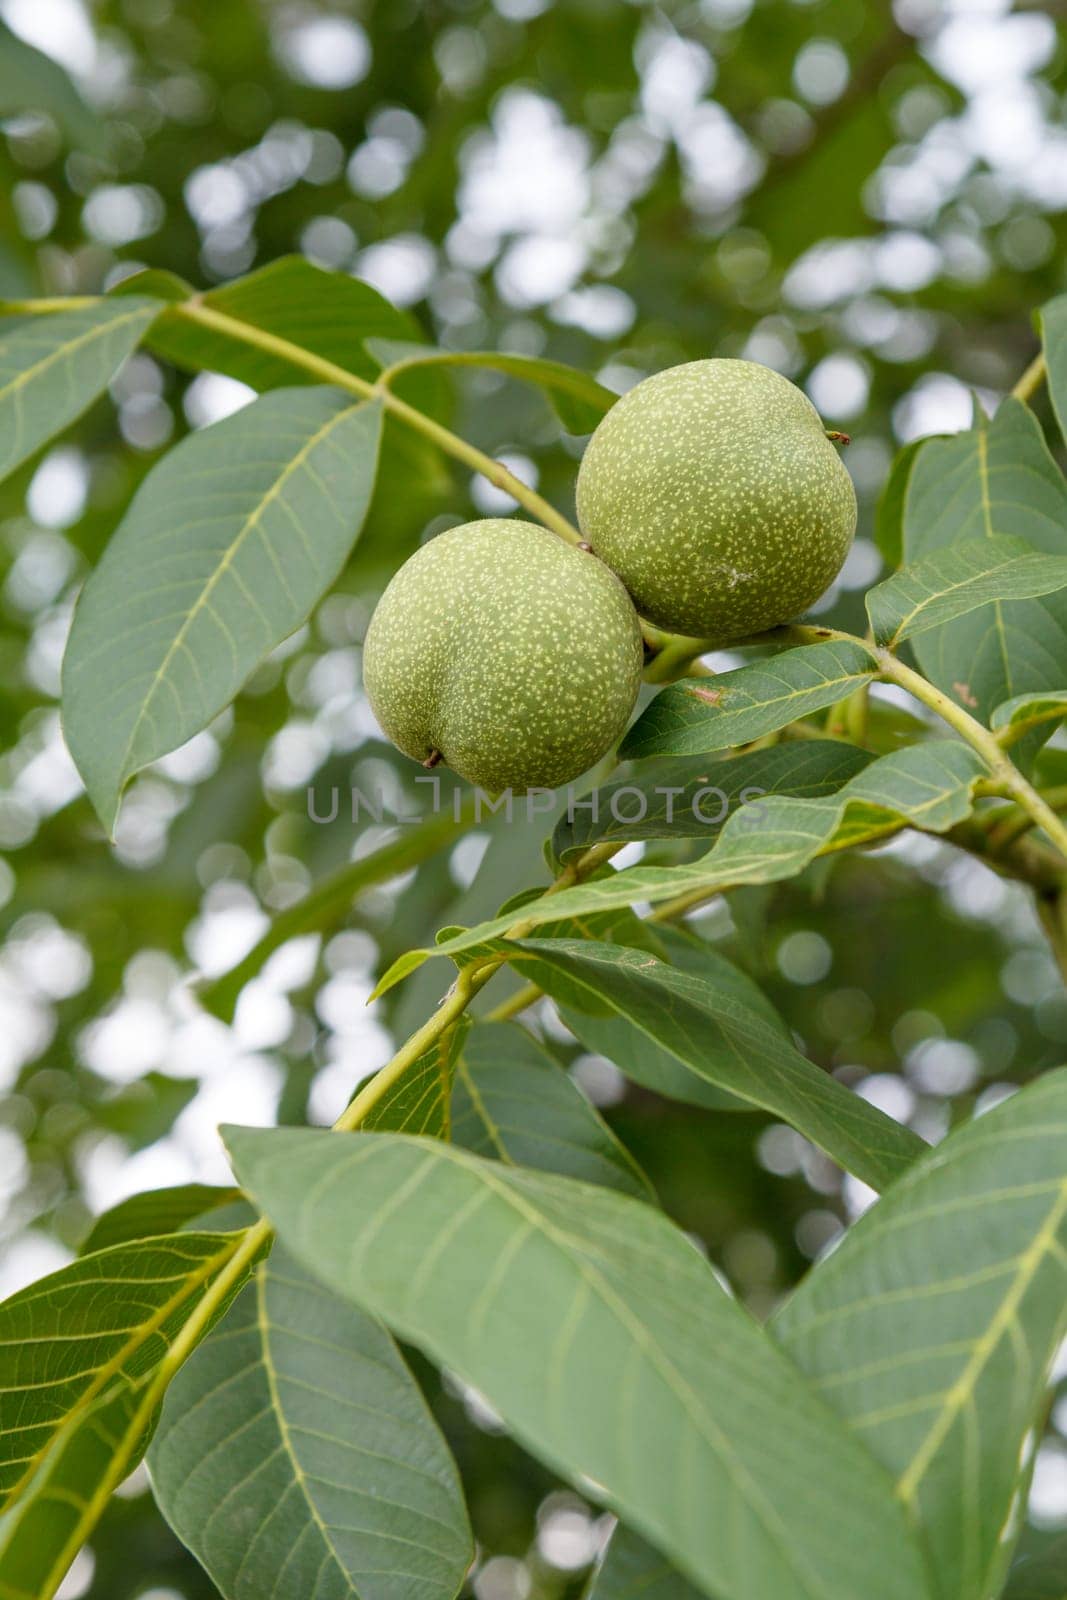 Close-up view of green unripe walnuts on a tree with an orchard on the blurred background.